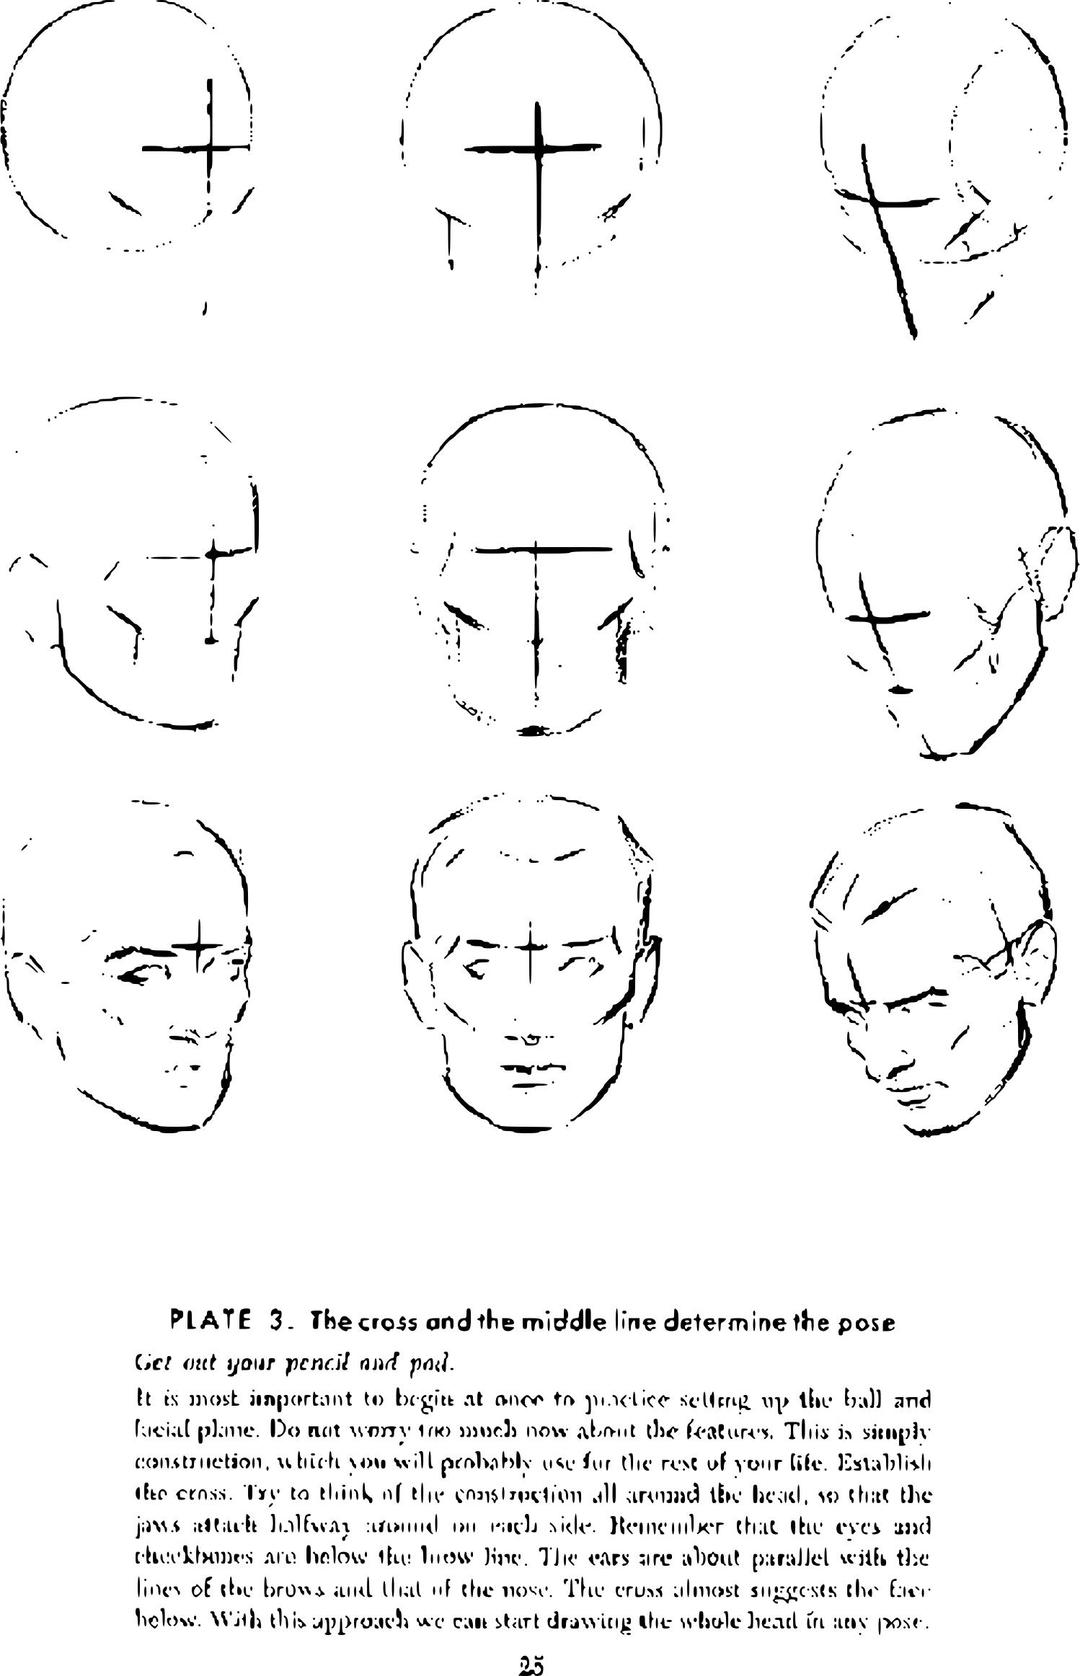 Andrew Loomis Drawing the Head and Hands (potrace) 20 png transparent